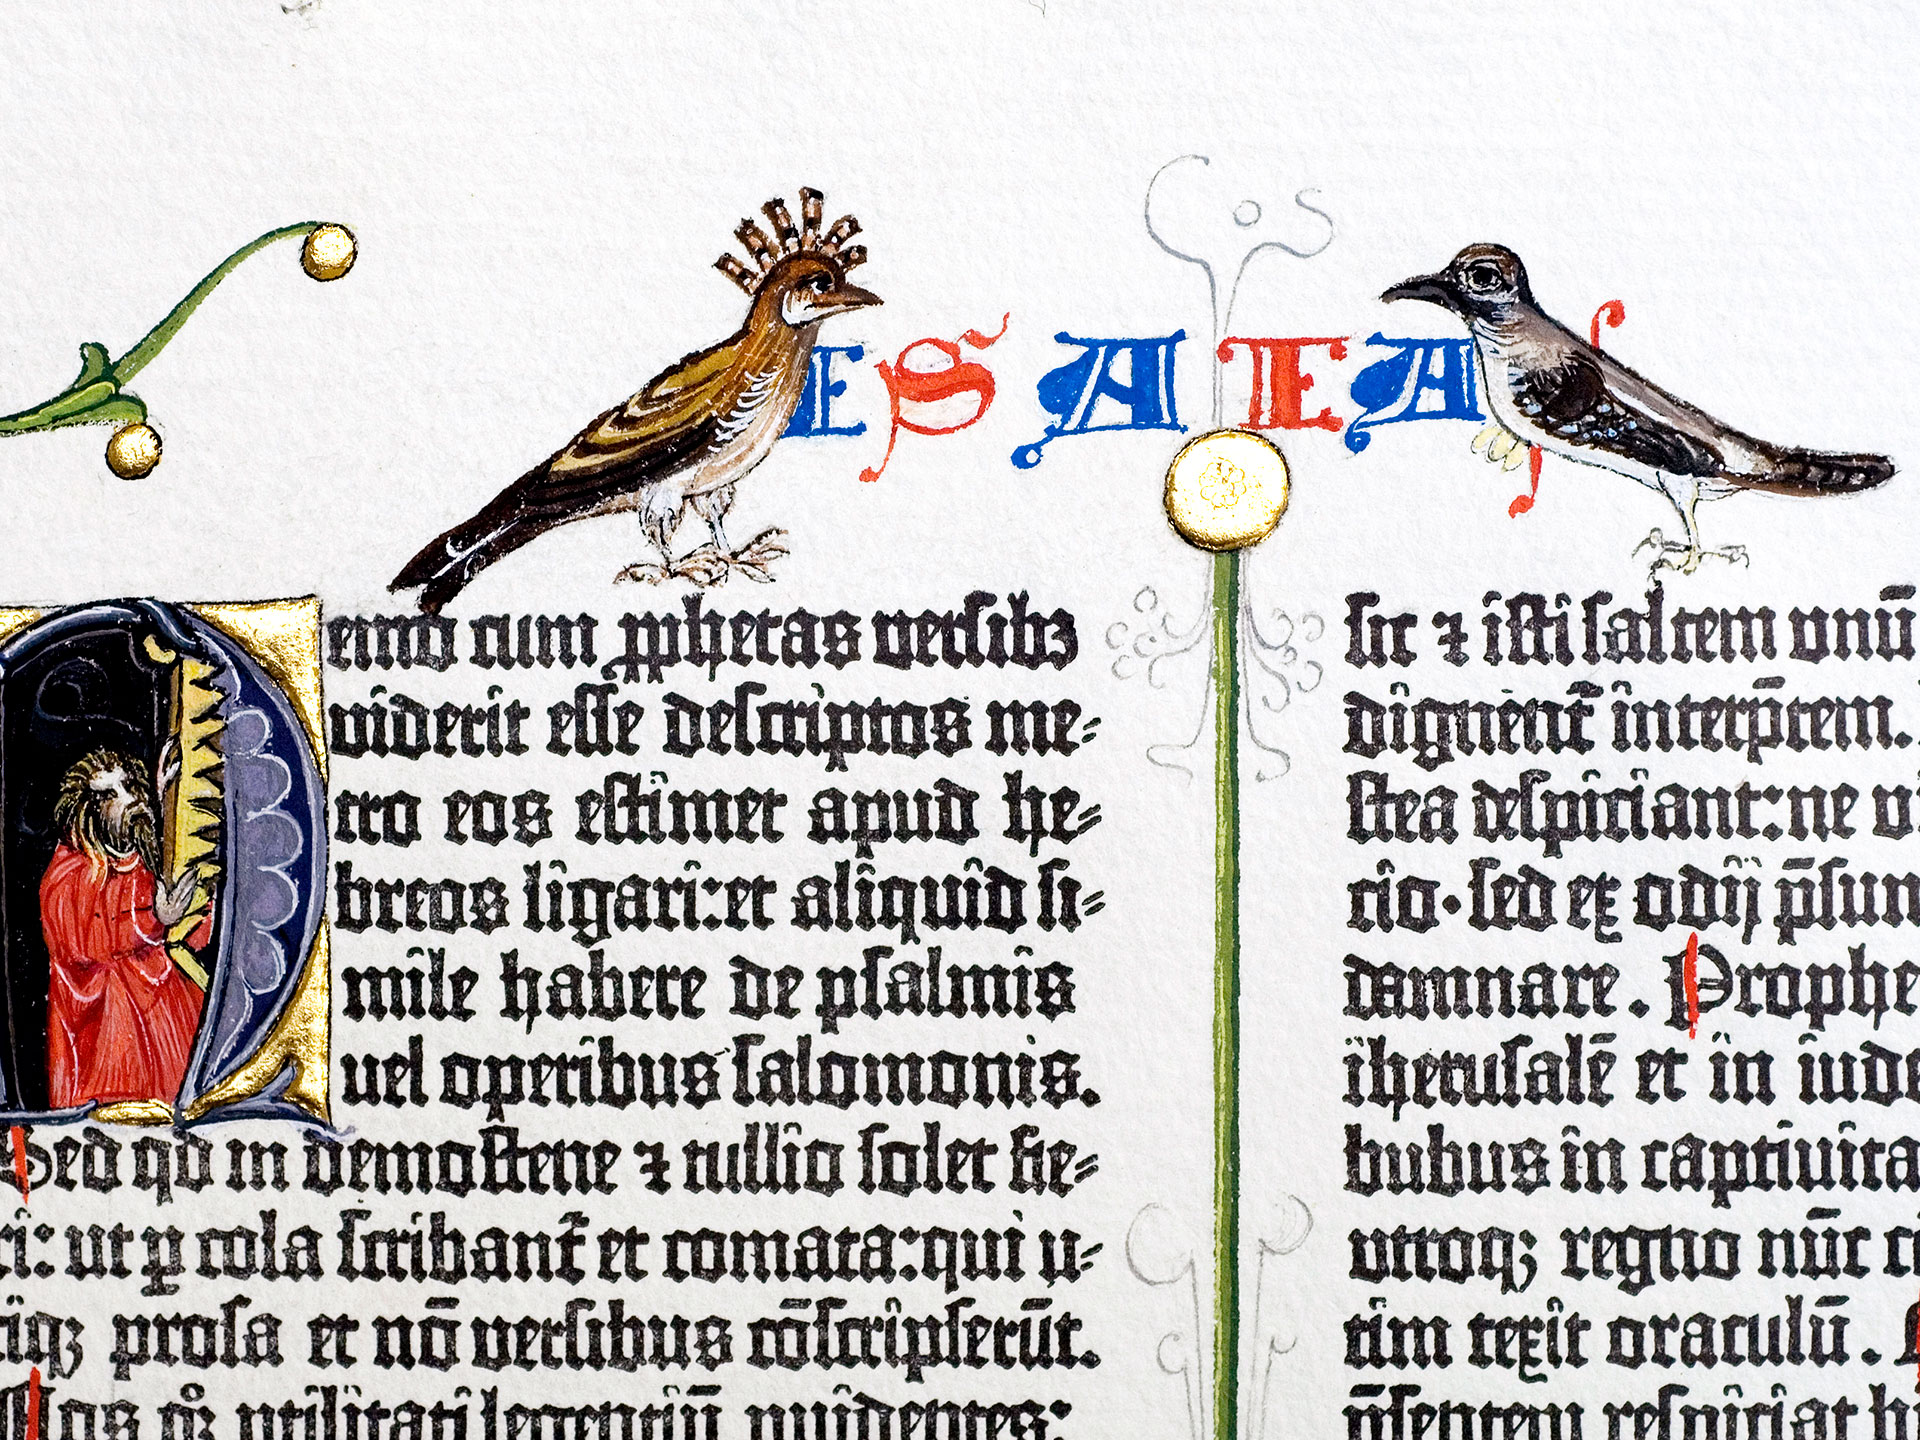 Prologue to the Book of Isaiah. Ornamental page from the Berlin Gutenberg Bible